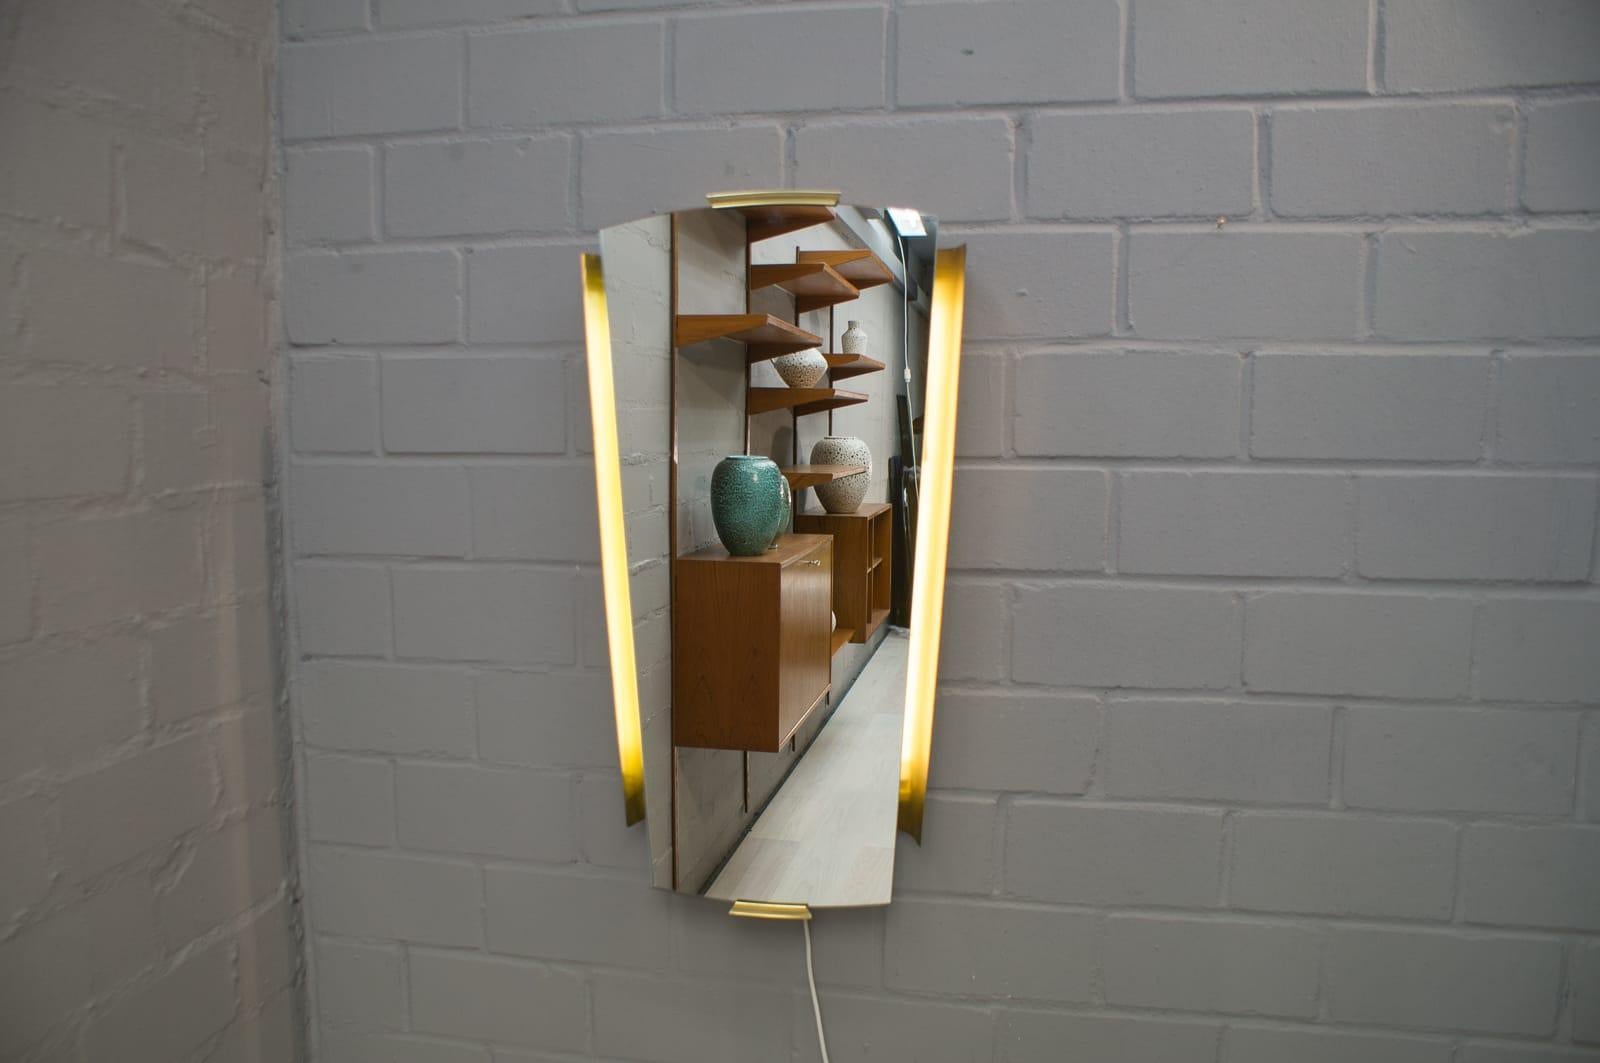 Mid-20th Century Brass Illuminated Wall Mirror by Ernest Igl for Hillebrand, Germany 1950s For Sale